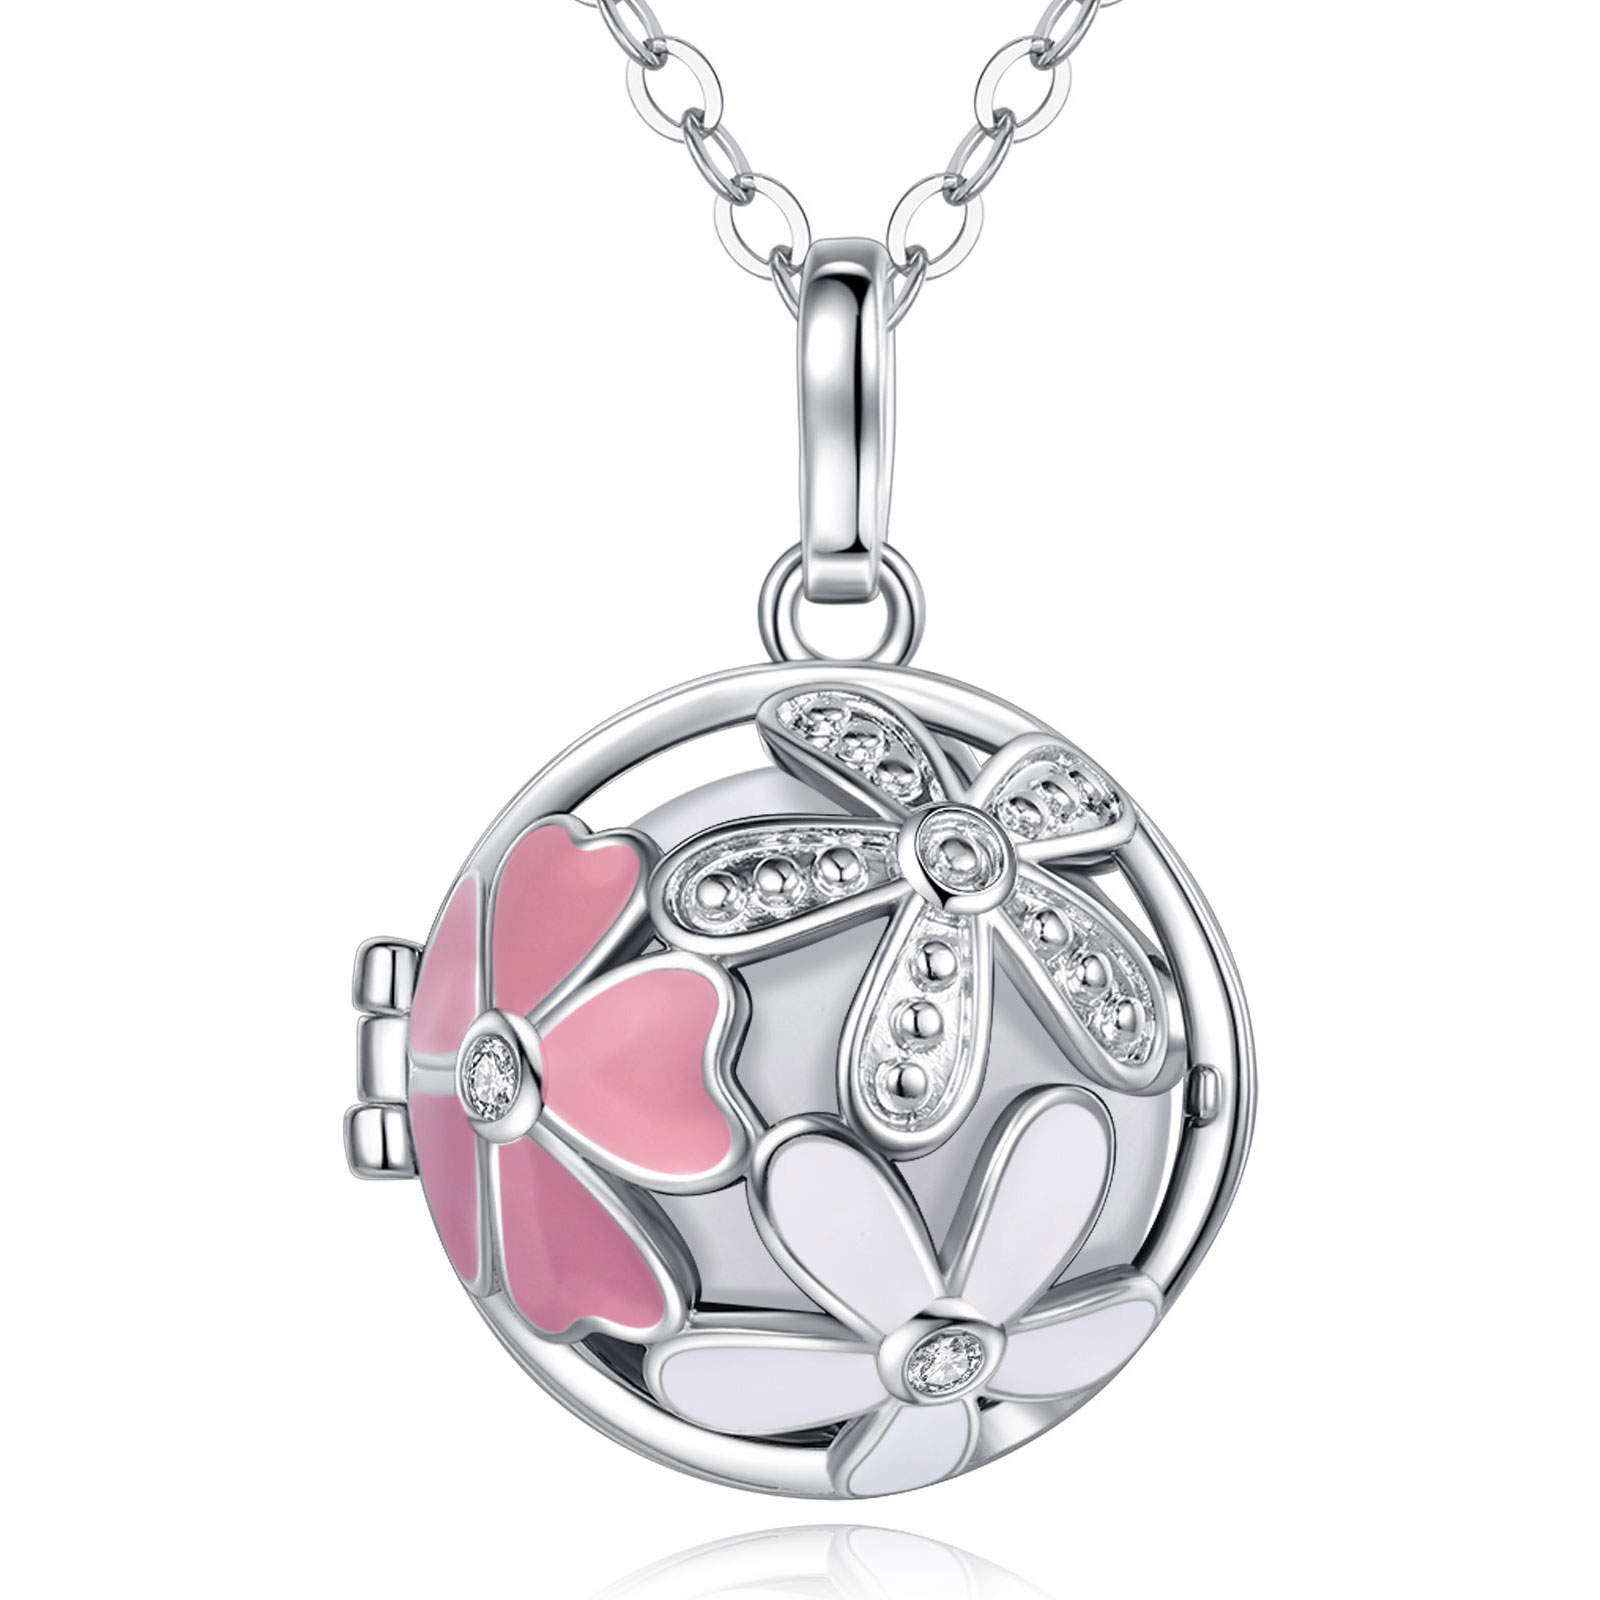 Silver Retro Flower Harmony Ball Locket Angel Chime Caller Bell Pregnancy Bola Necklace